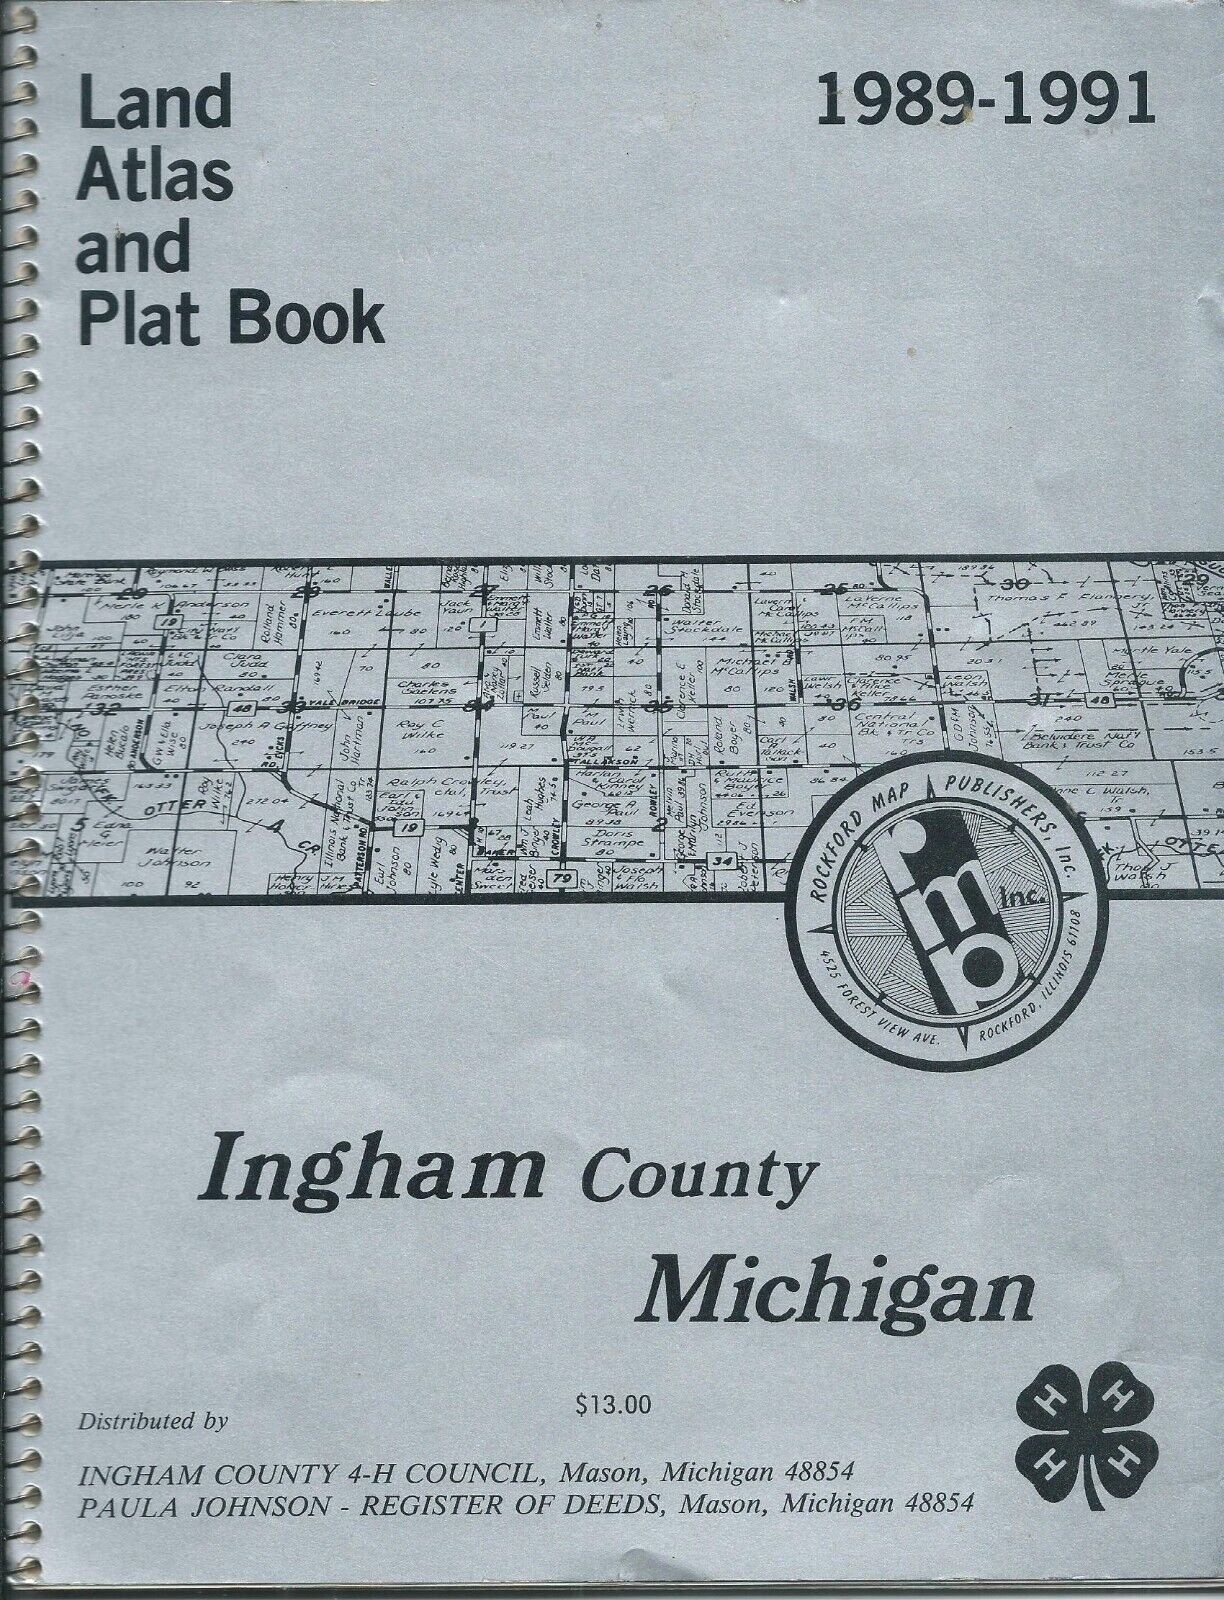 1989-1991 vintage INGHAM COUNTY Michigan LAND ATLAS & PLAT BOOK Maps Ads 72pages